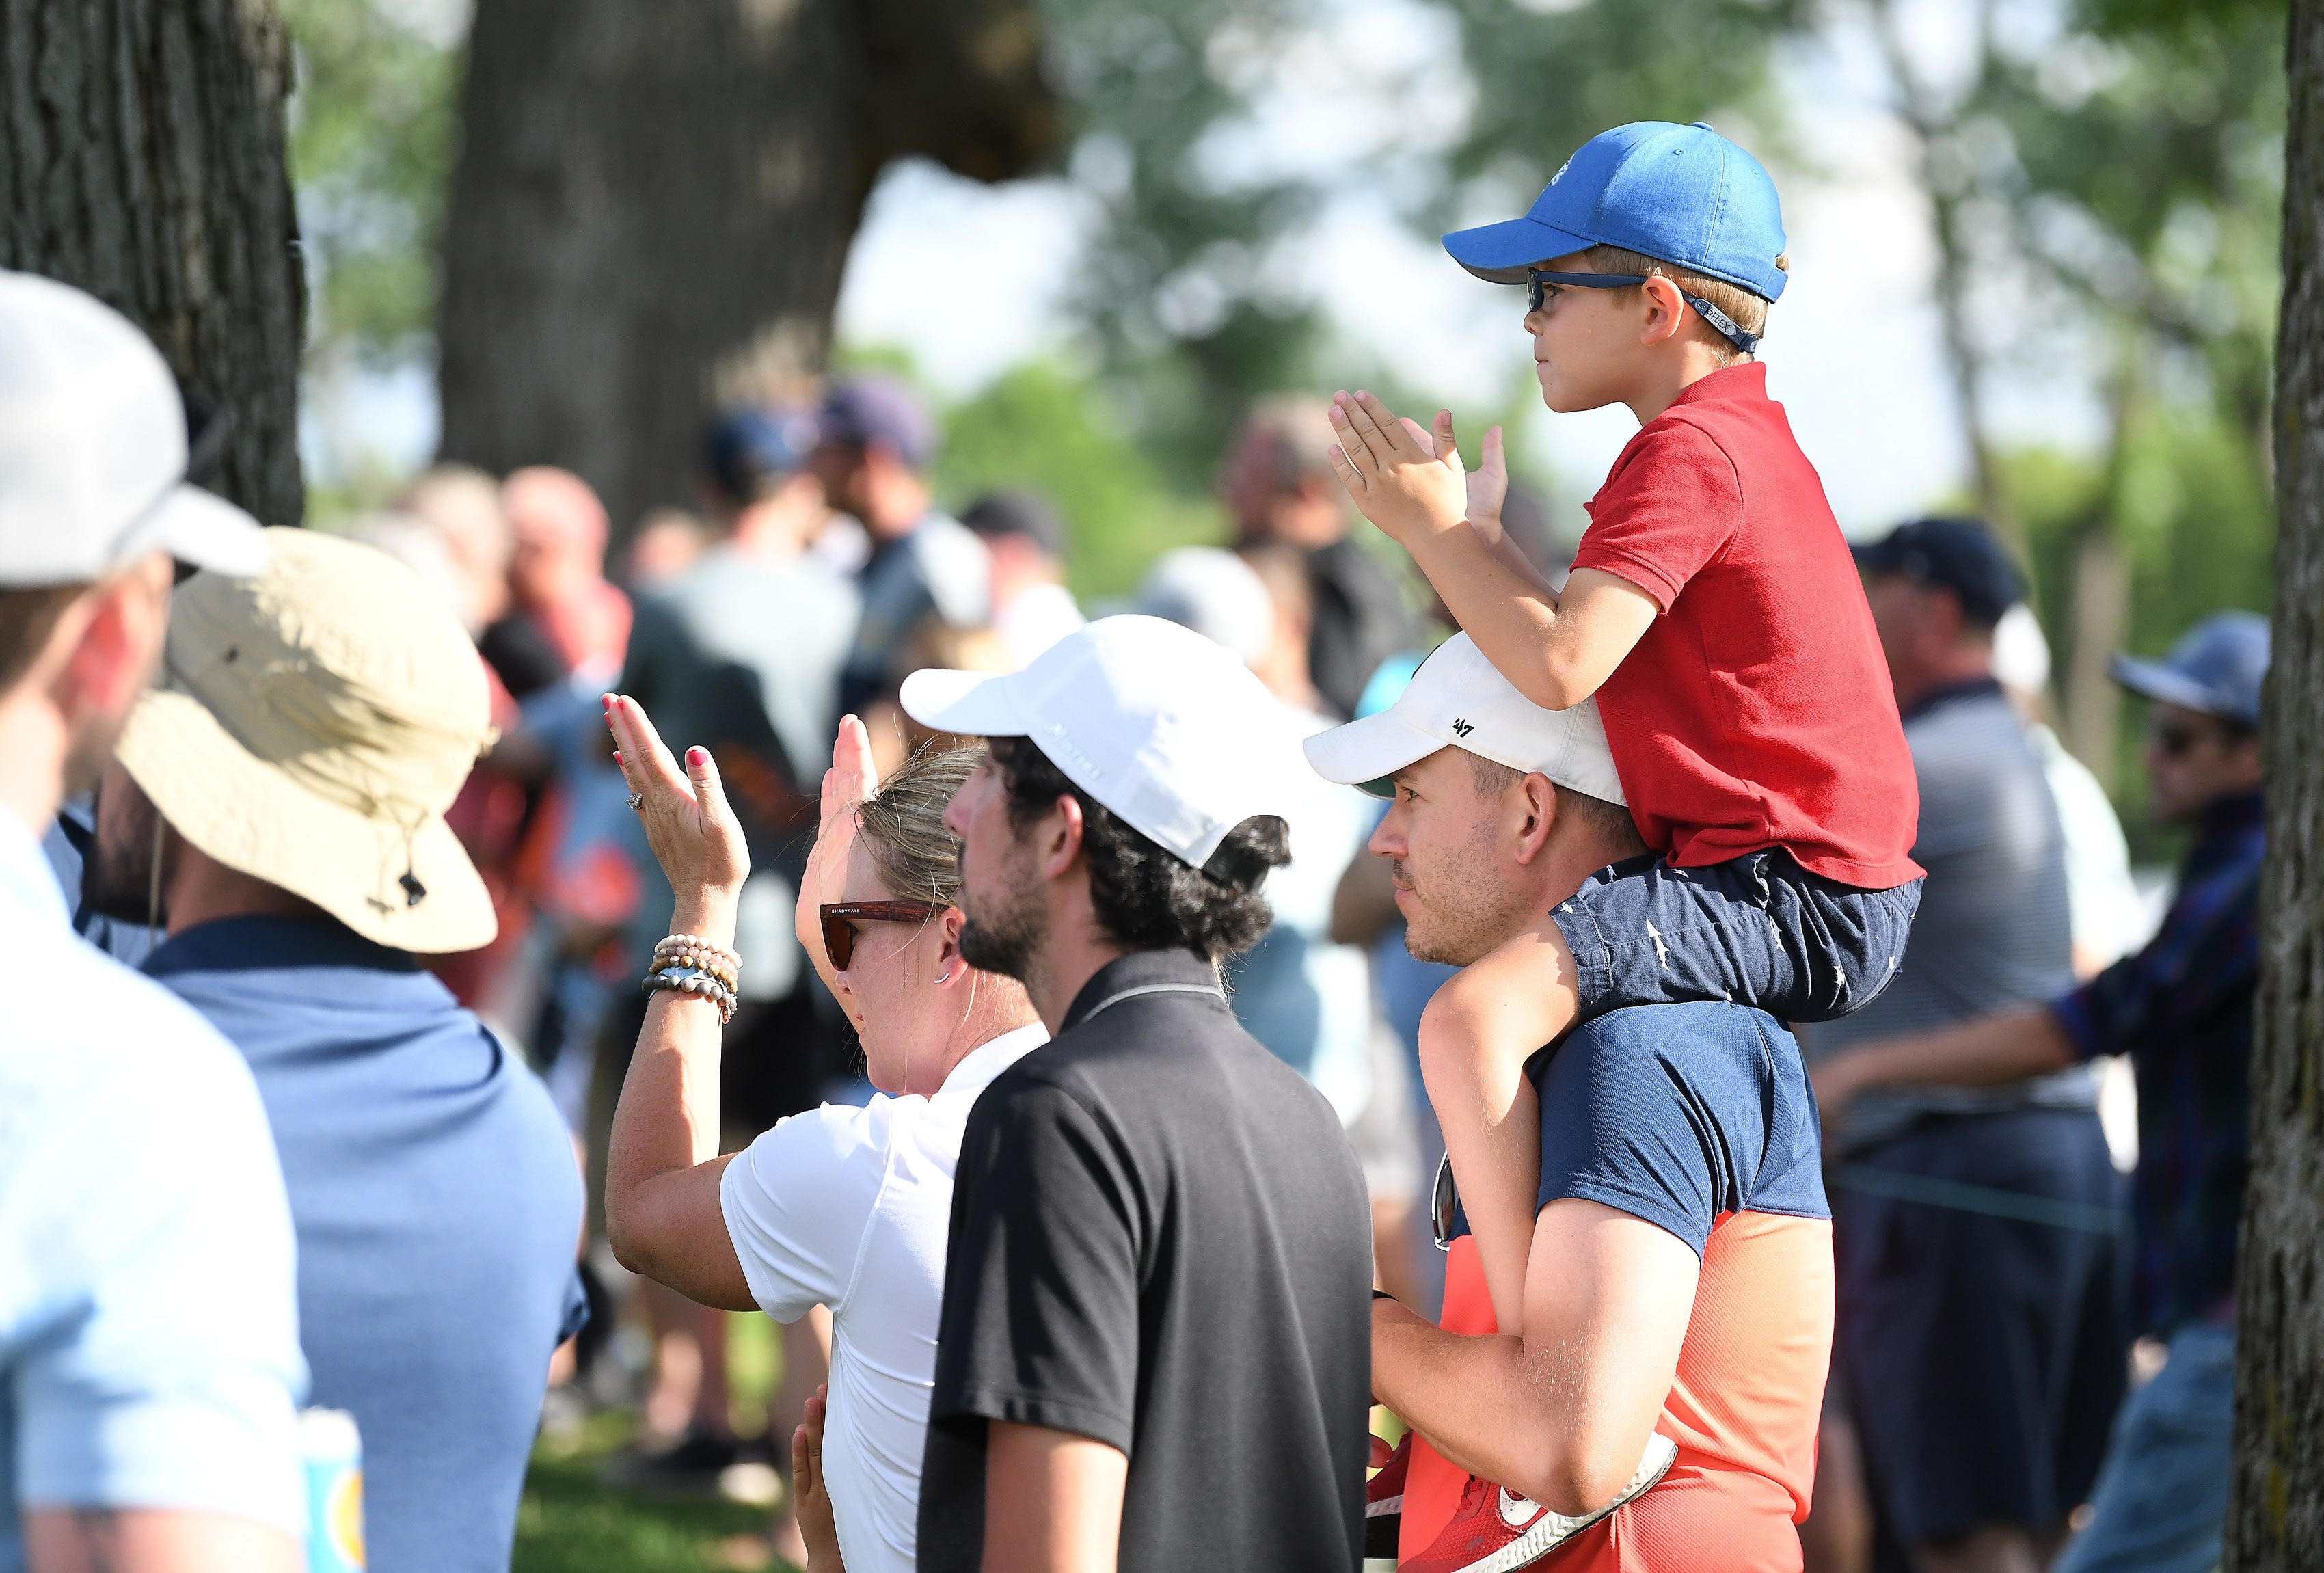 On the shoulders of his dad Kenny Laurence, 43, of Clarkston, Mikey Laurence (cq), 4, applauds with others at the 9th tee in Round 1.